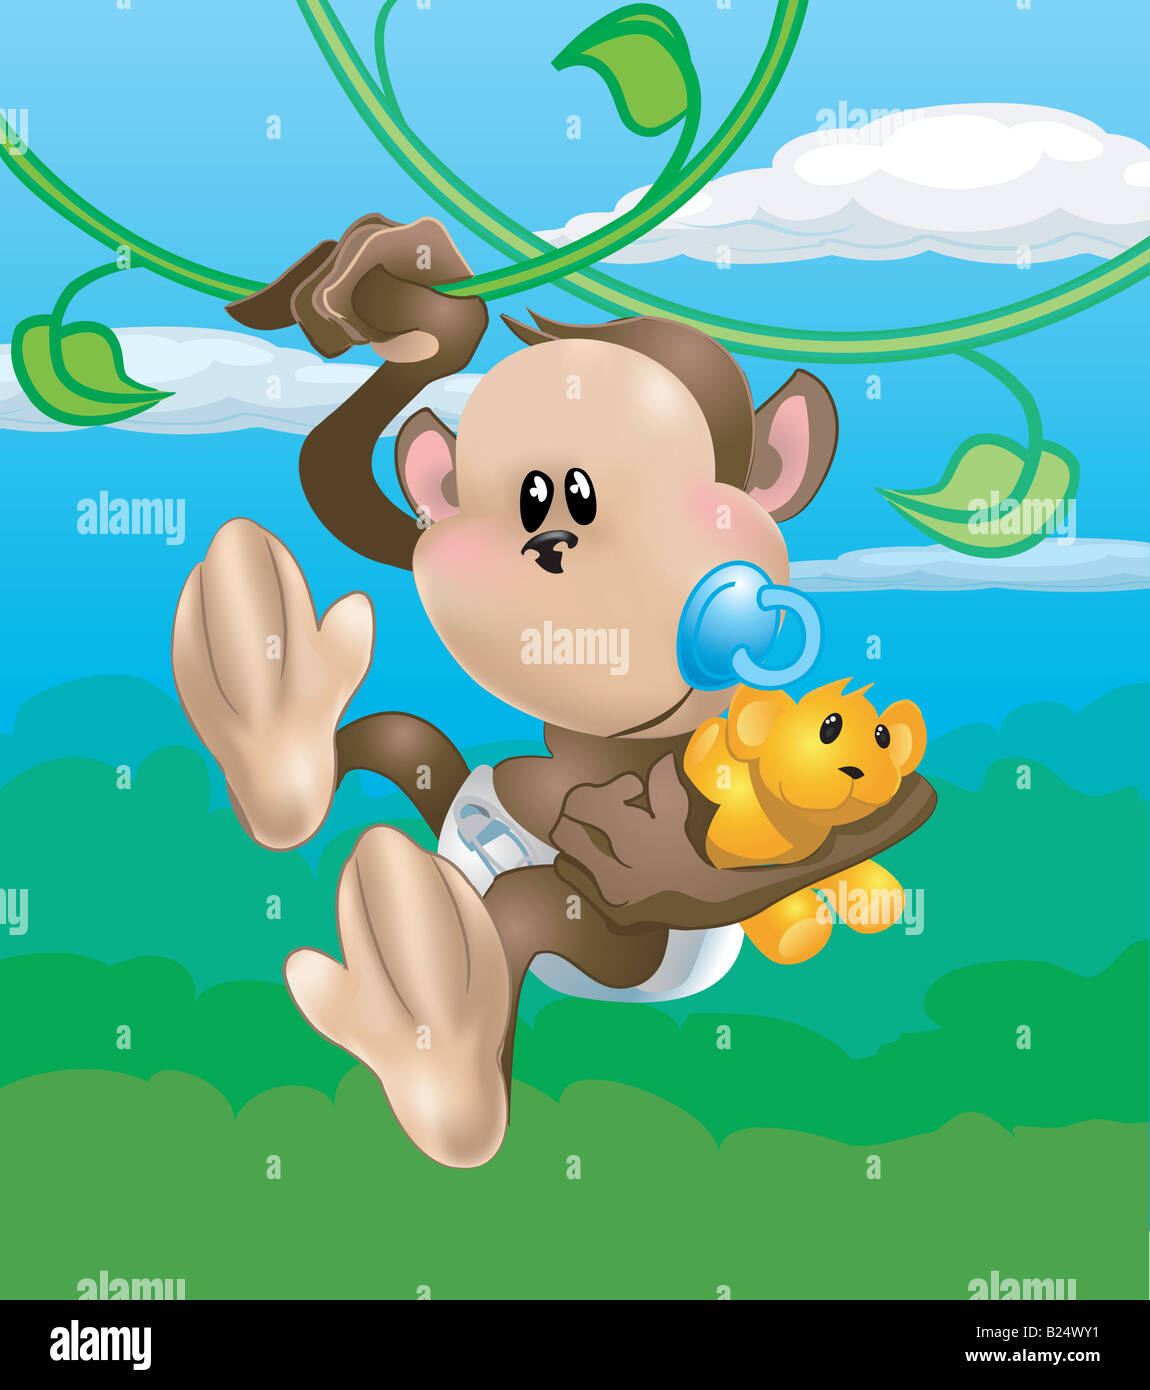 A cute baby monkey swinging through the trees Stock Photo